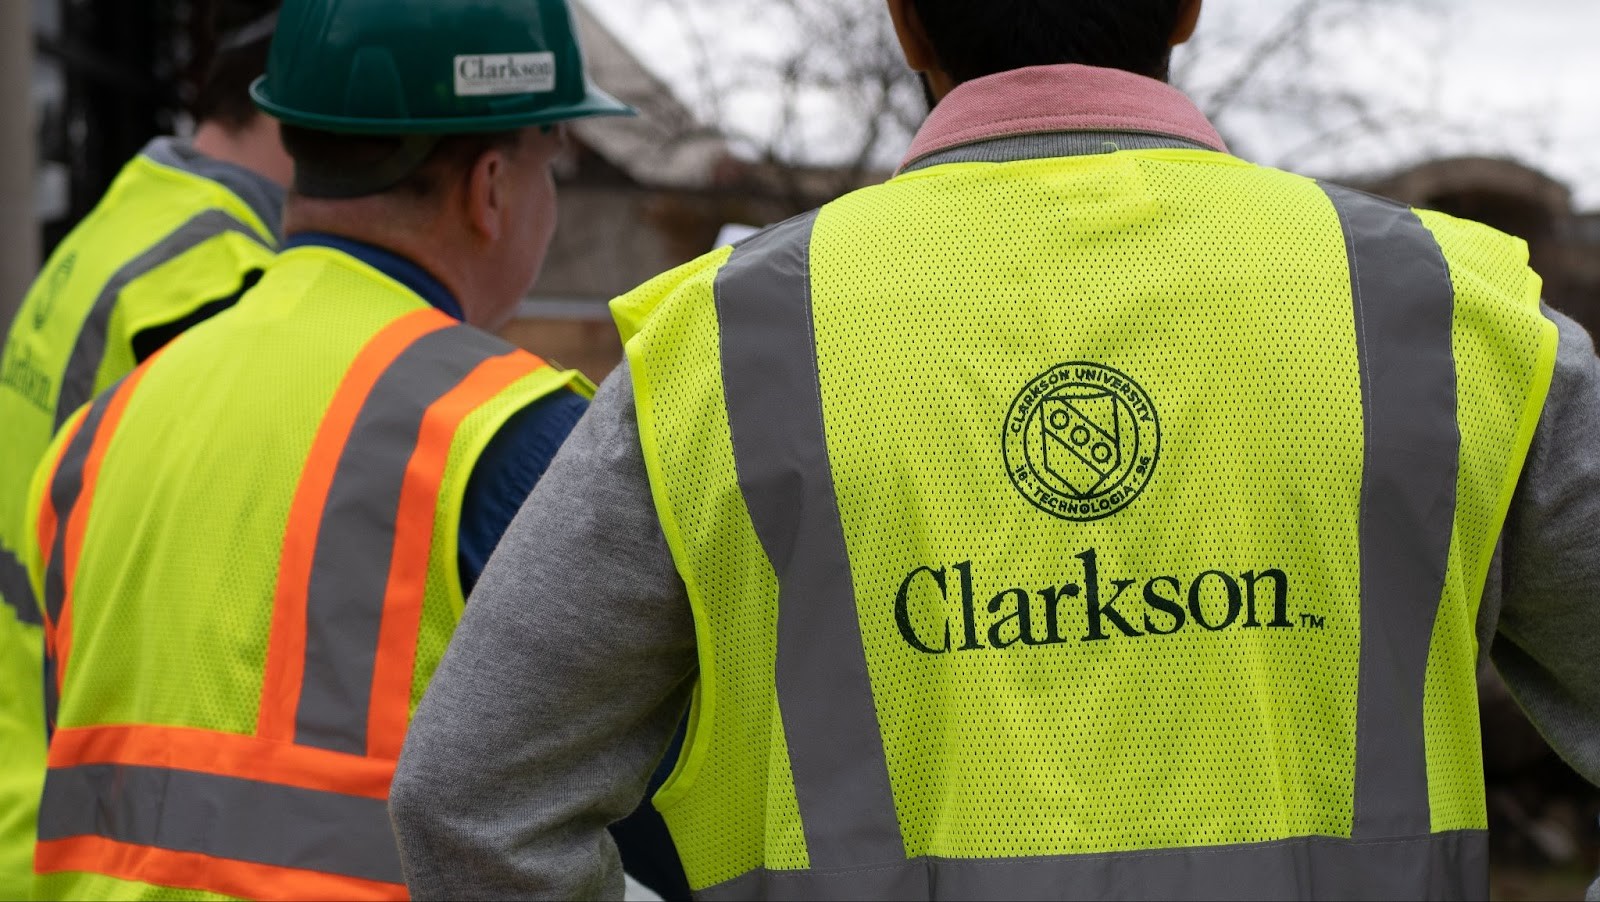 Clarkson University logo on the back of a high-visibility vest being worn by a Clarkson student